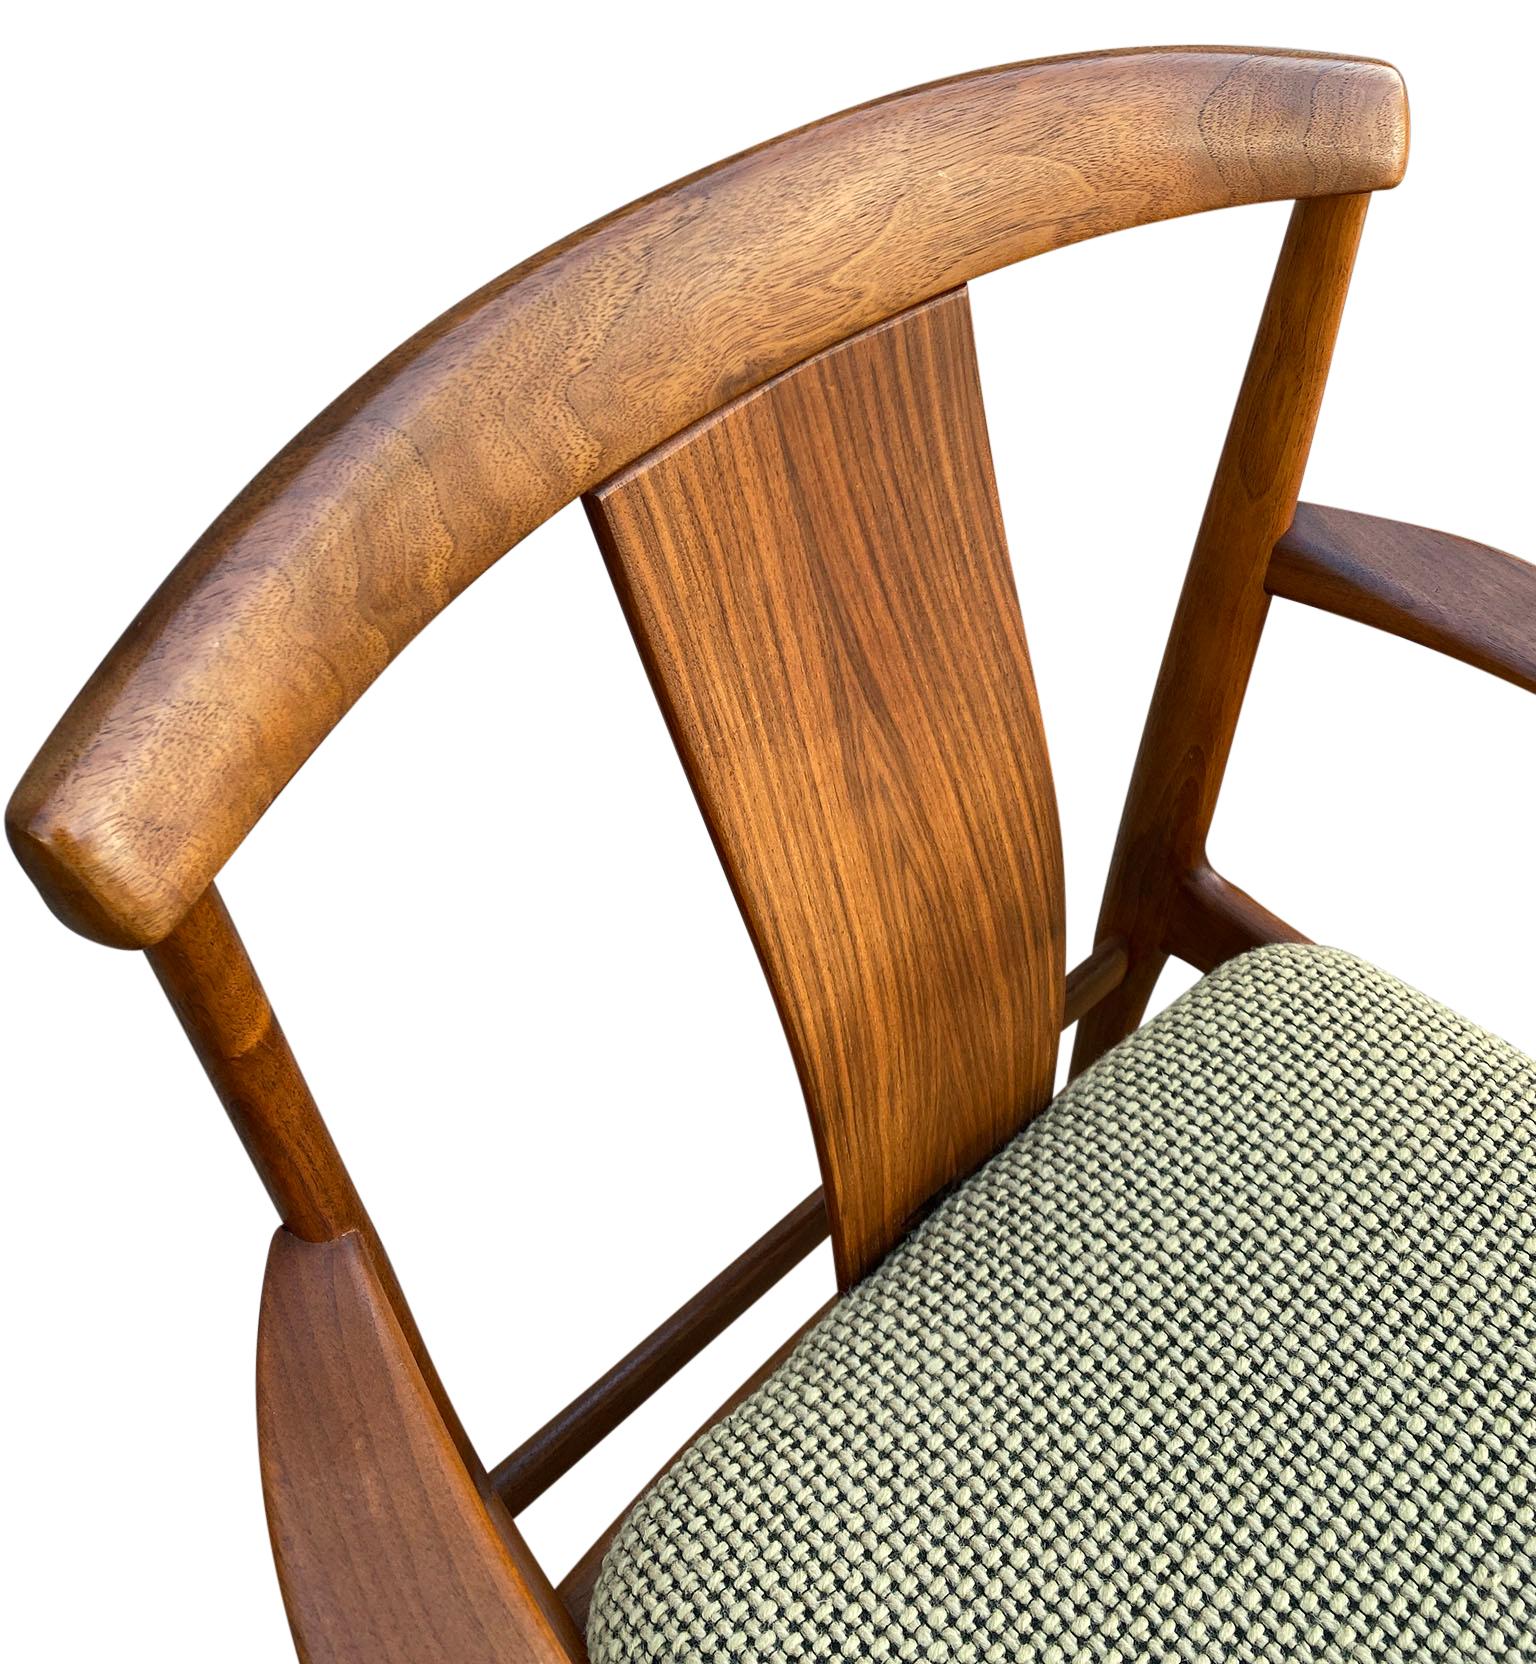 Mid-20th Century Midcentury Set of 6 Teak Dining Chairs by Folke Ohlsson for DUX